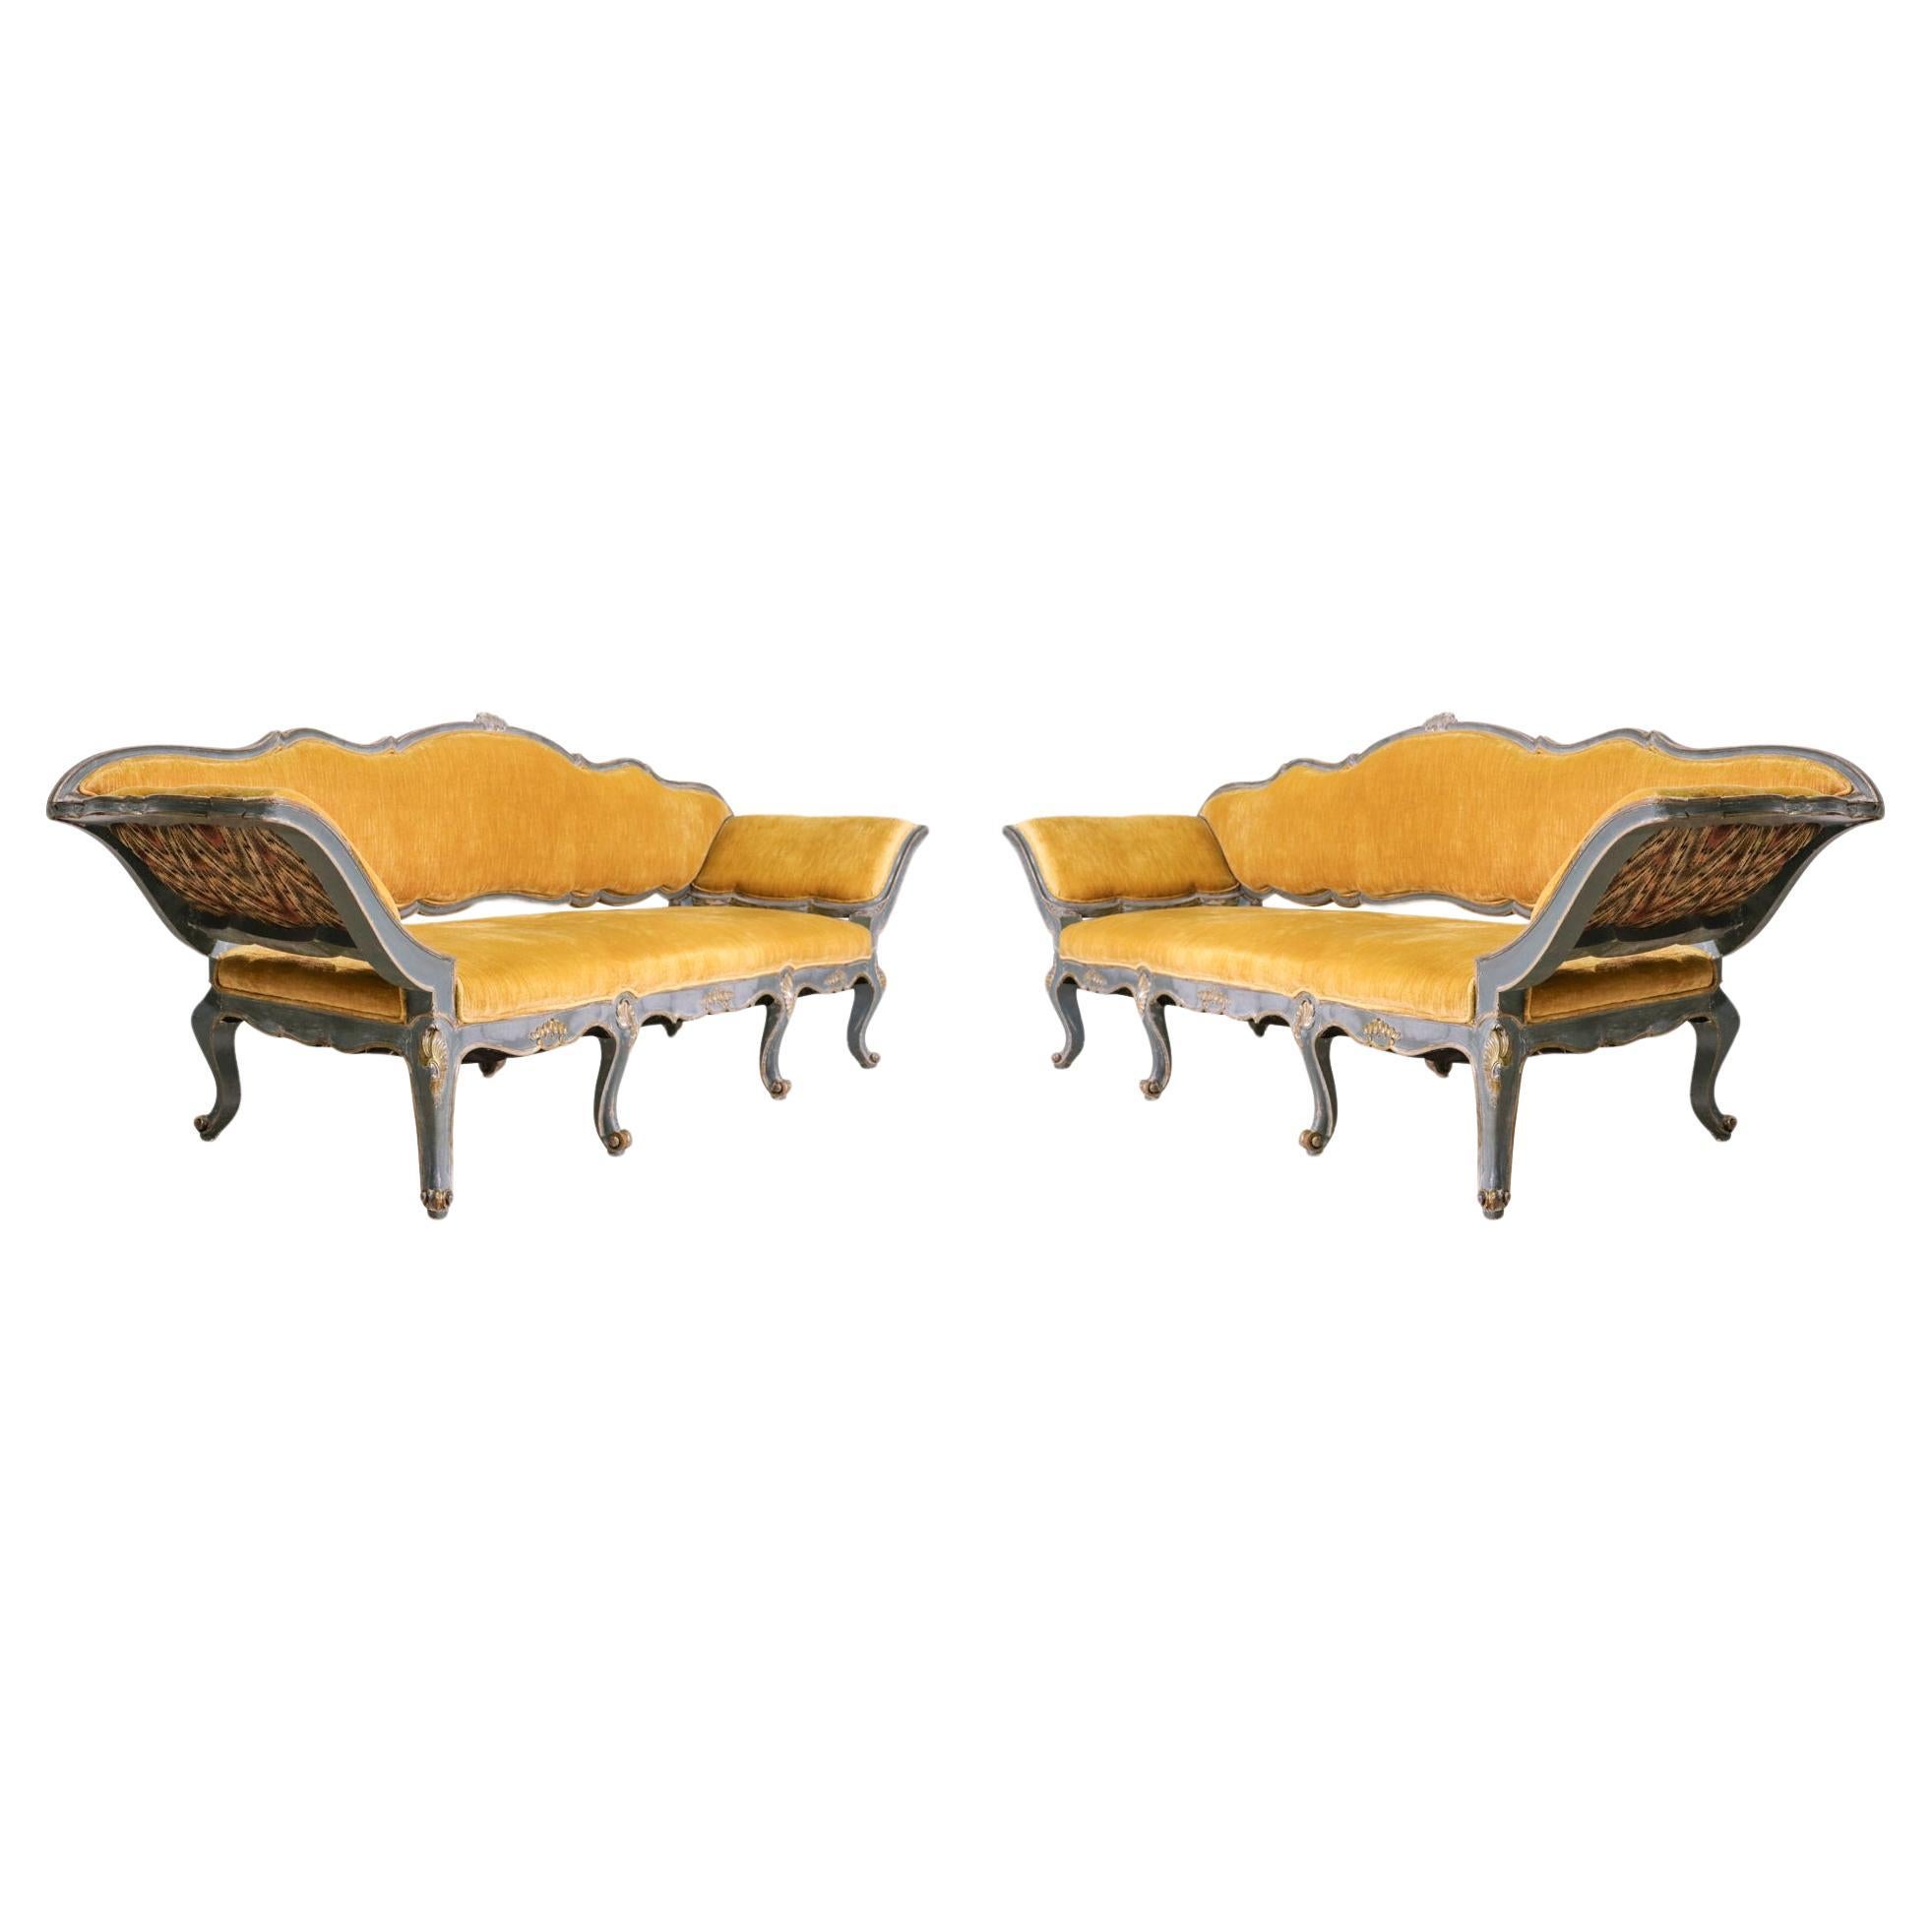 Pair of Venetian "Fan" Sofas with Mustard-Yellow Upholstery For Sale